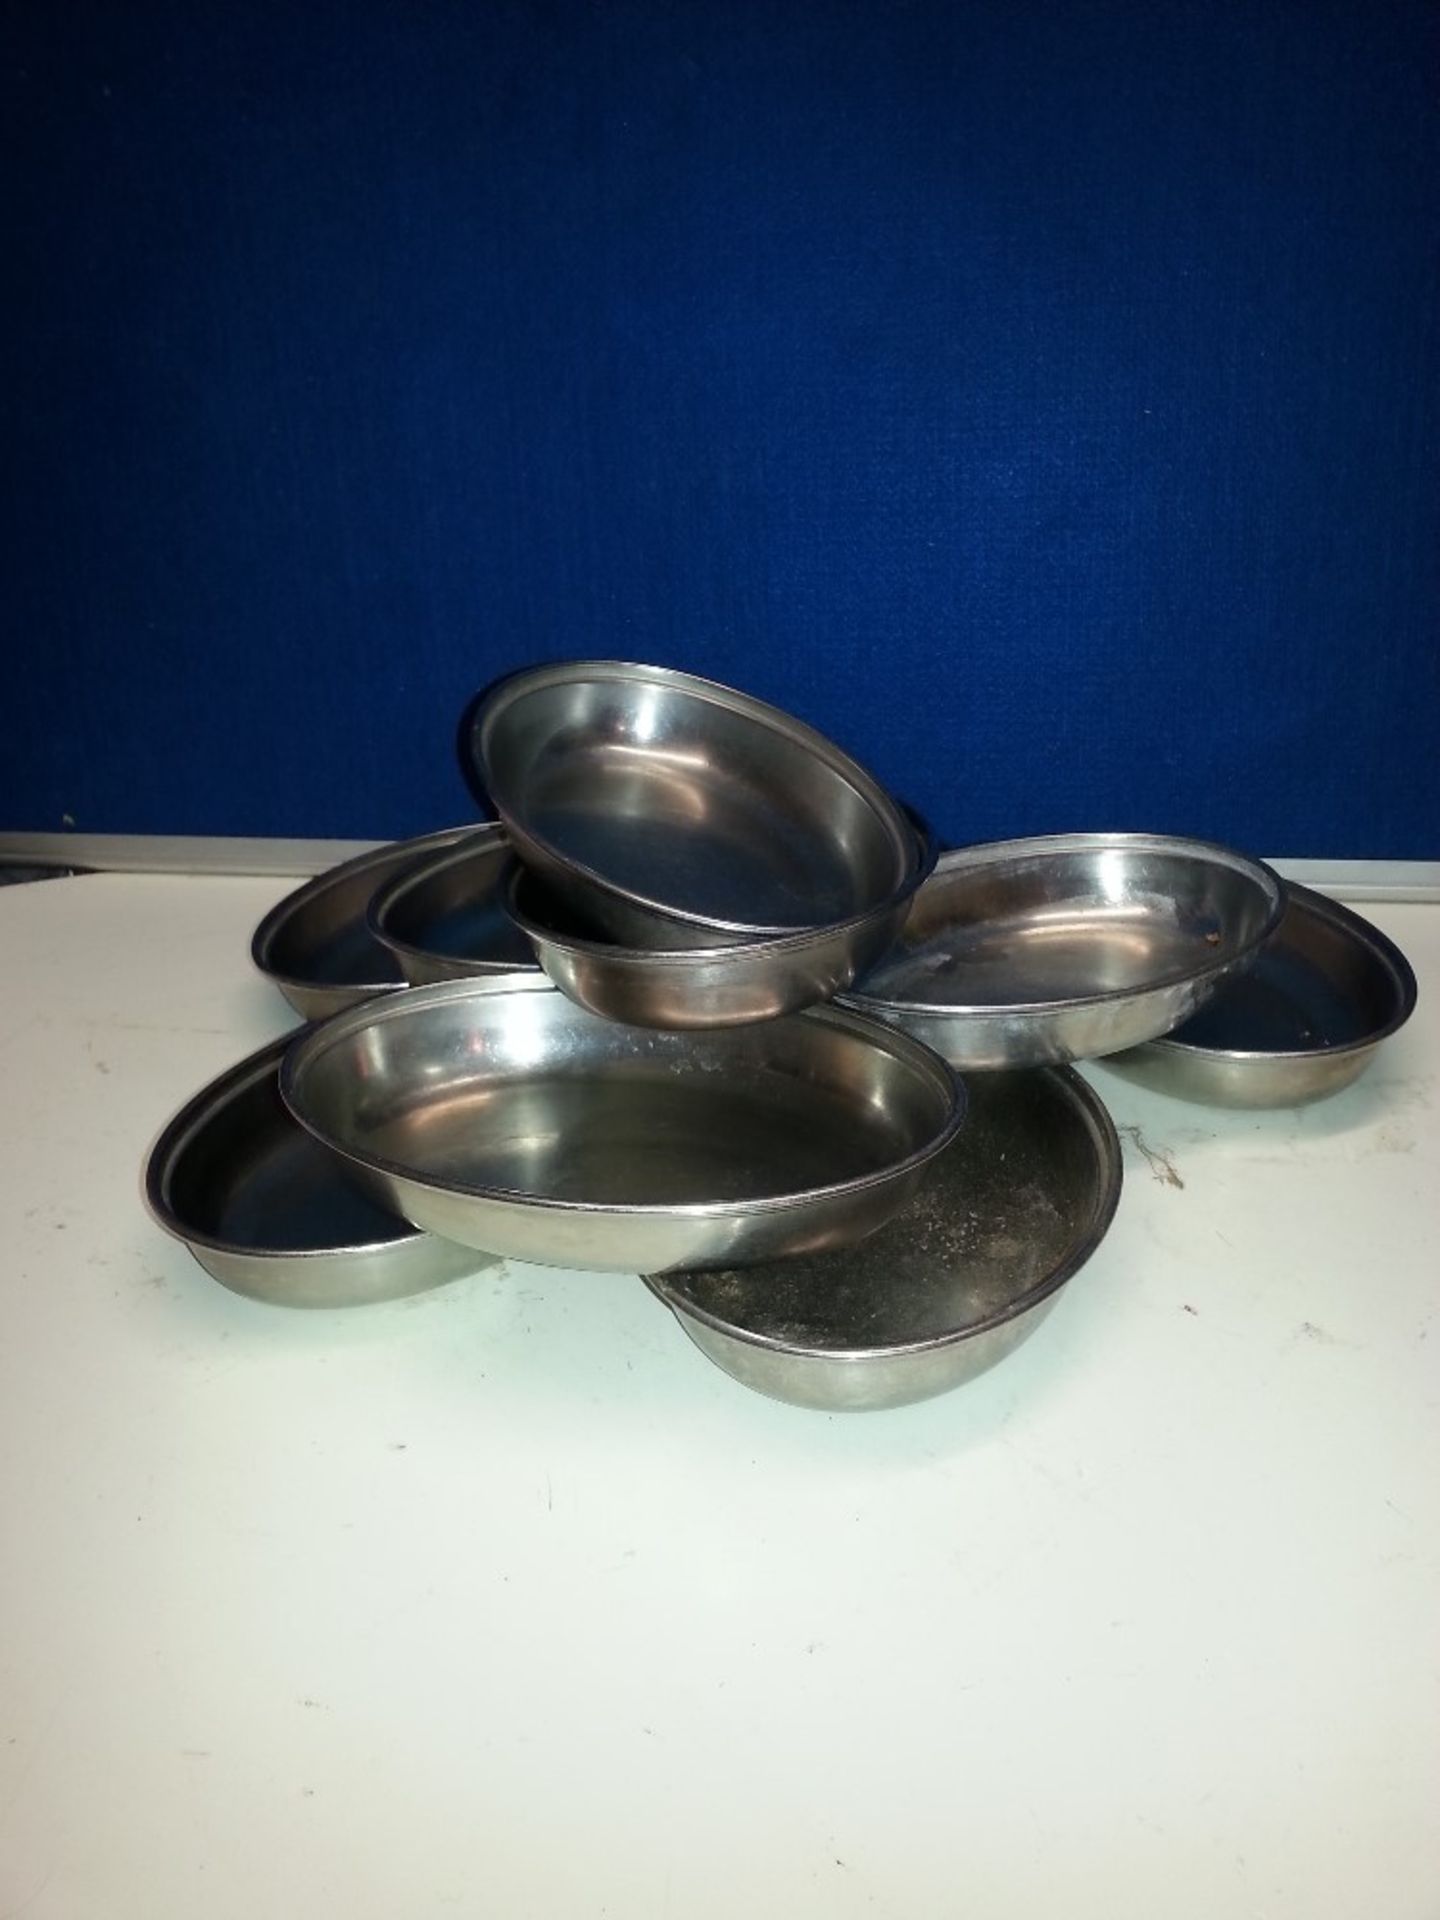 10x Med stainless steel oval dishes